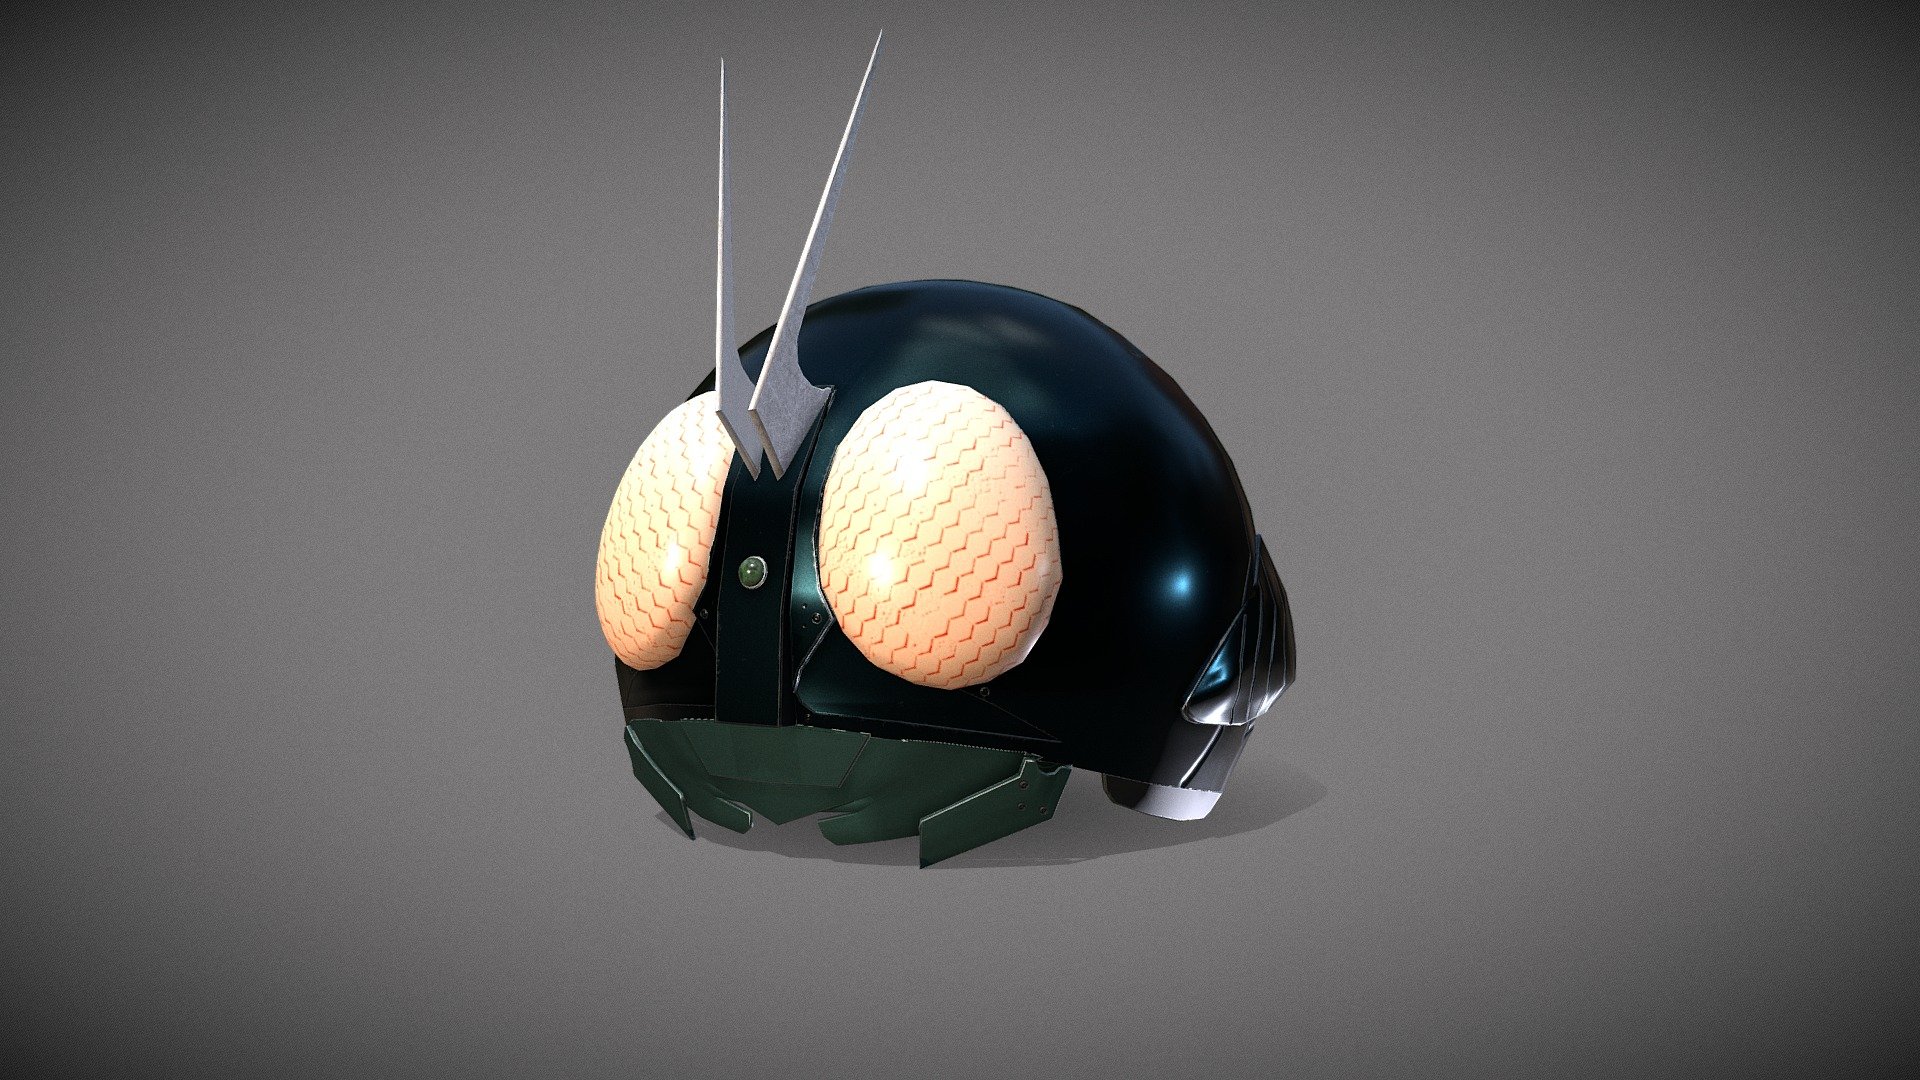 From Shin Kamen Rider.
Modeling was done in MAYA, texturing was done mainly in Substance 3d model